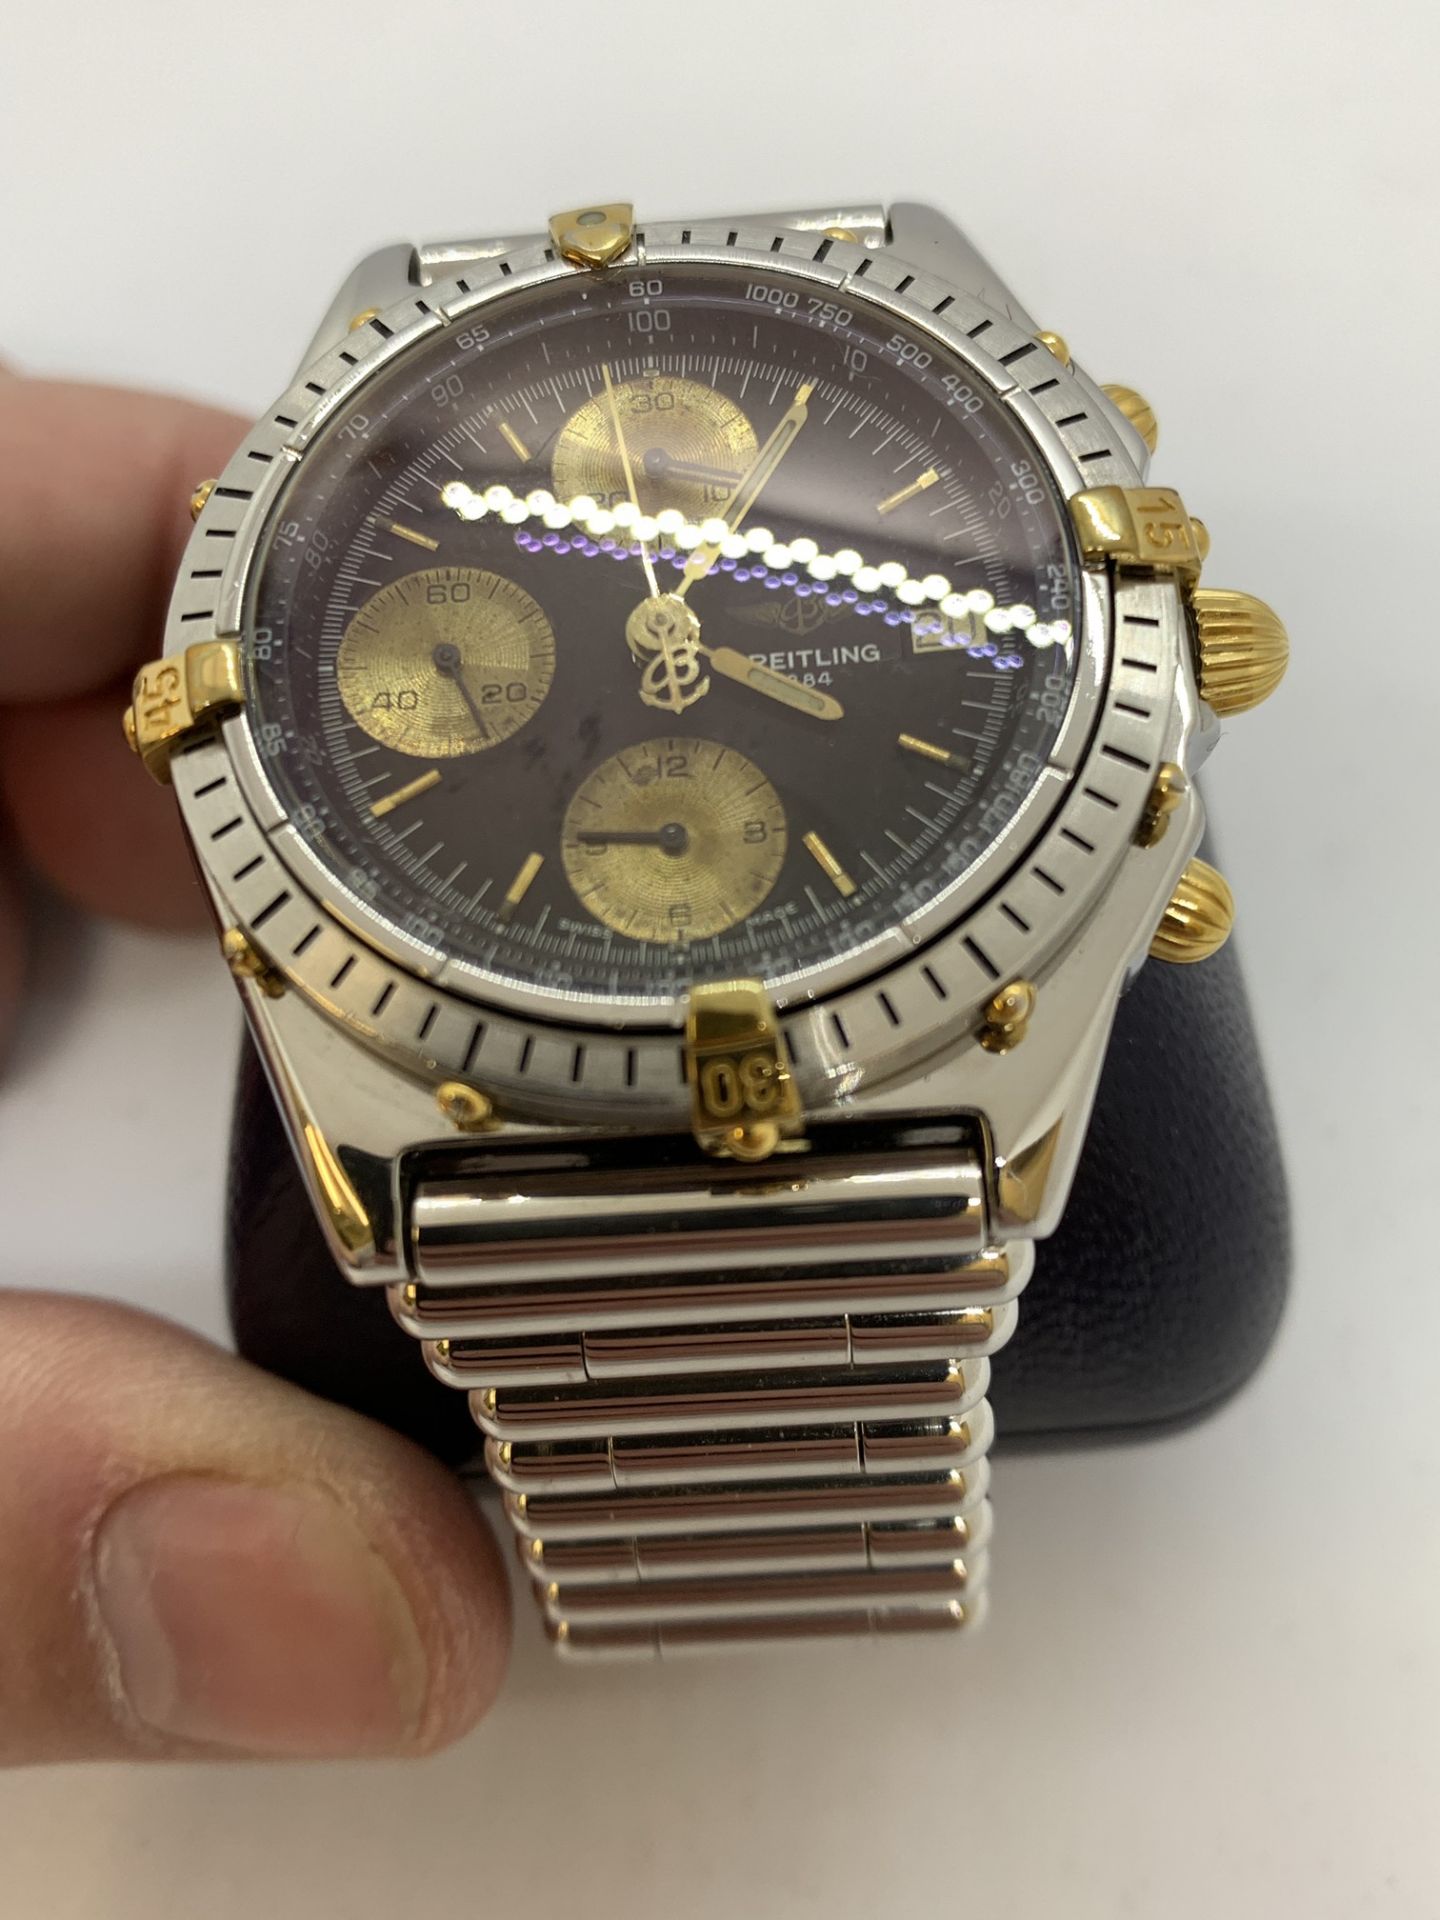 BREITLING B13047 GOLD & STAINLESS STEEL WATCH - Image 2 of 9